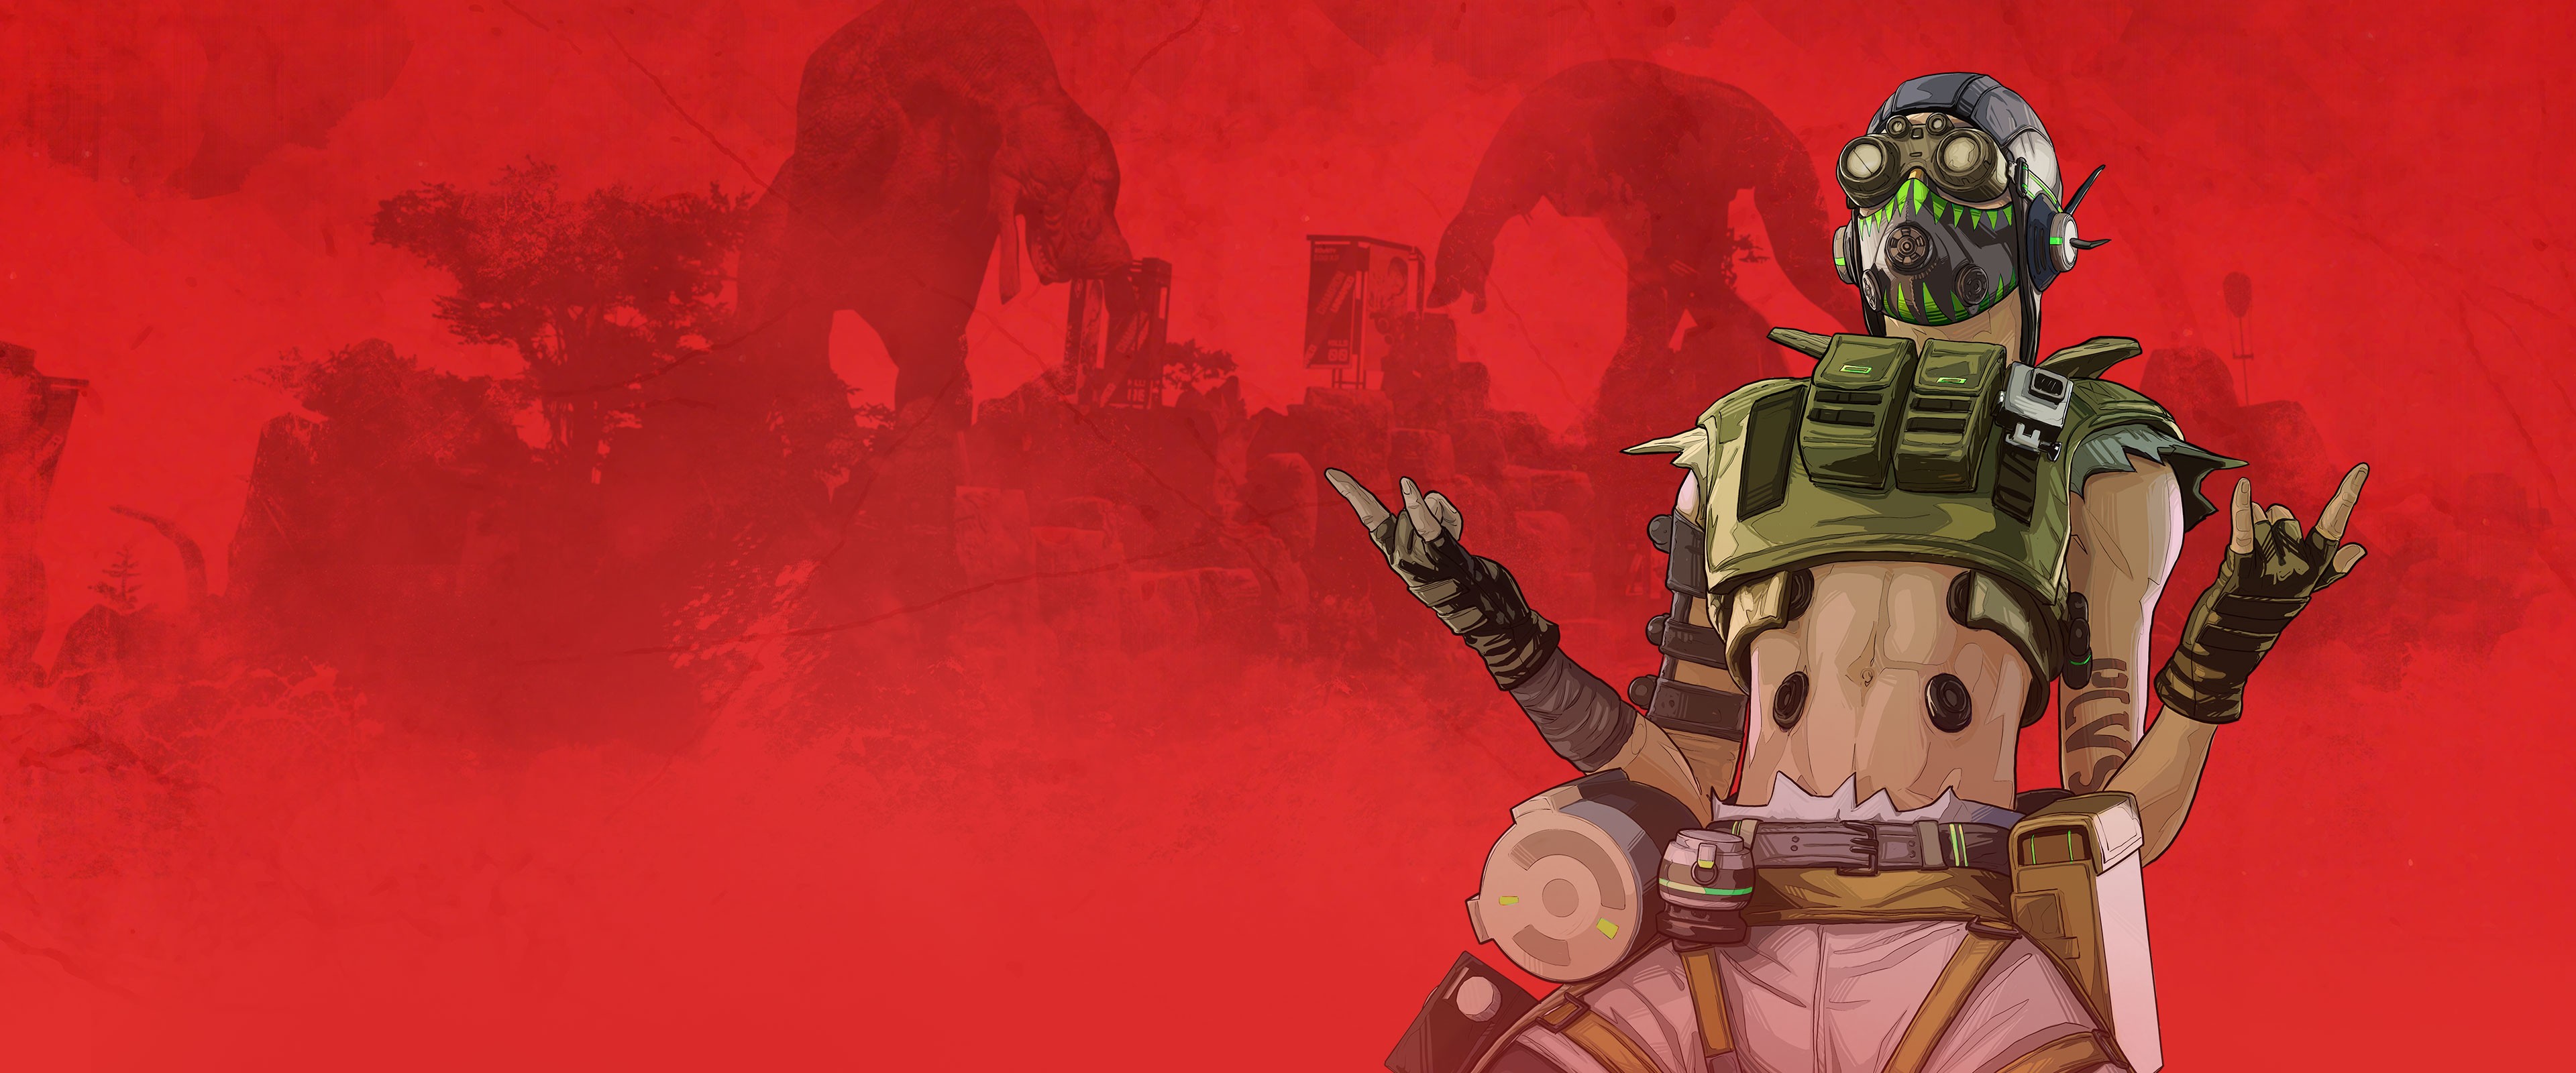 Apex Legends Octane Confirmed Image Details Release Date And More Dot Esports